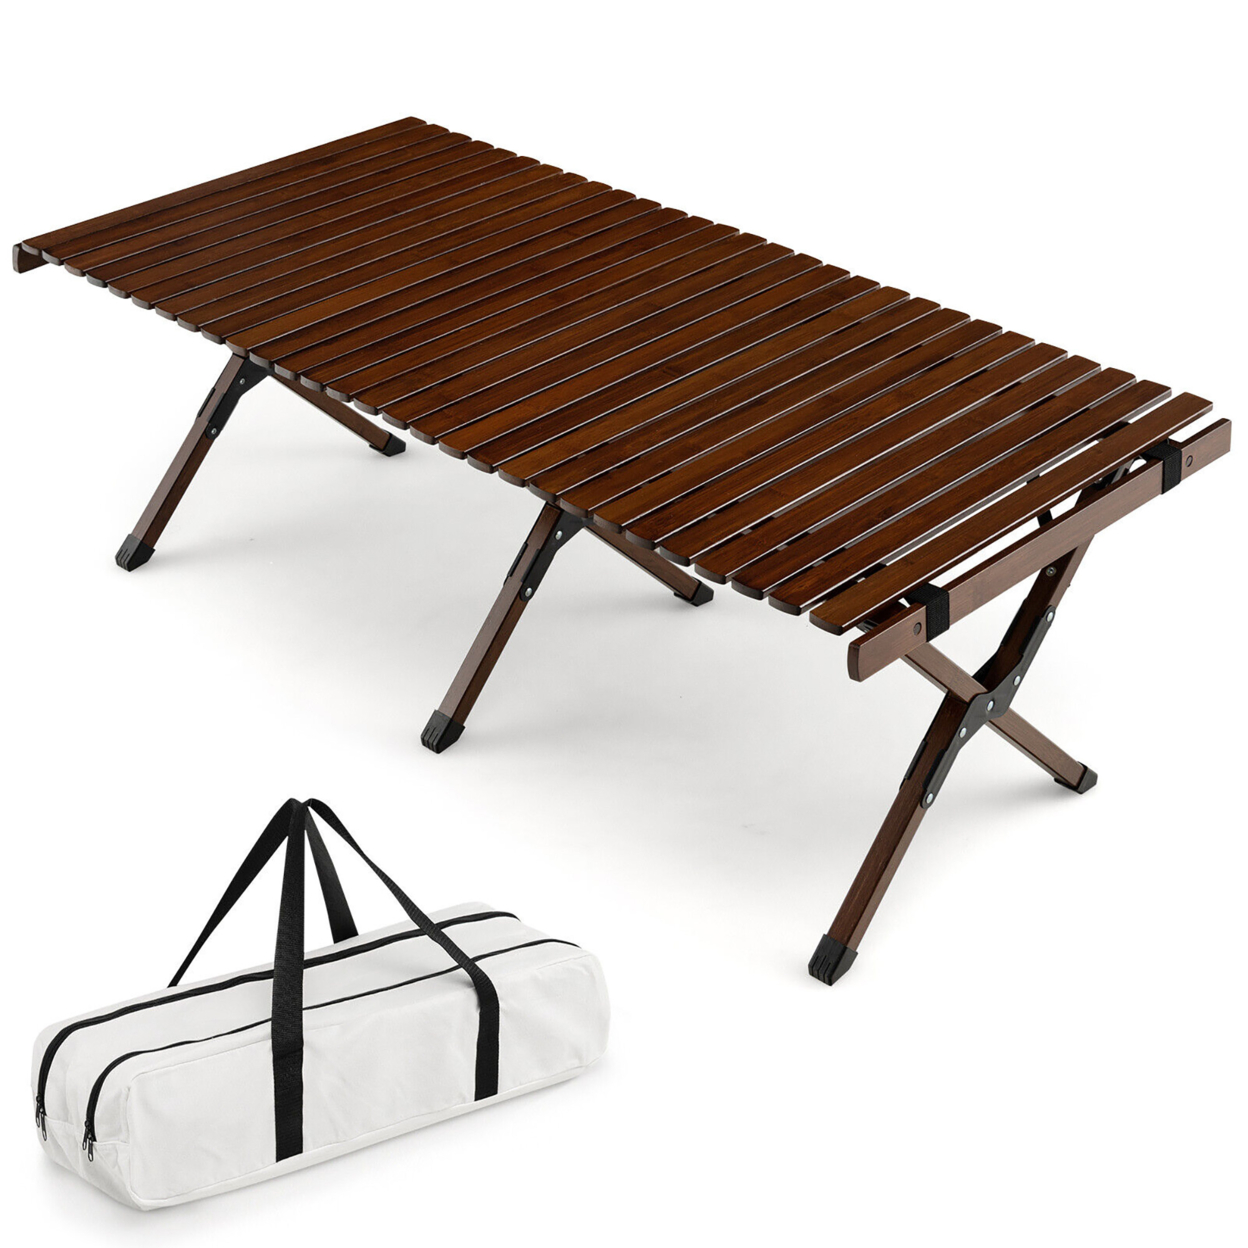 Portable Folding Bamboo Camping Table W/ Carry Bag Outdoor & Indoor - Coffee